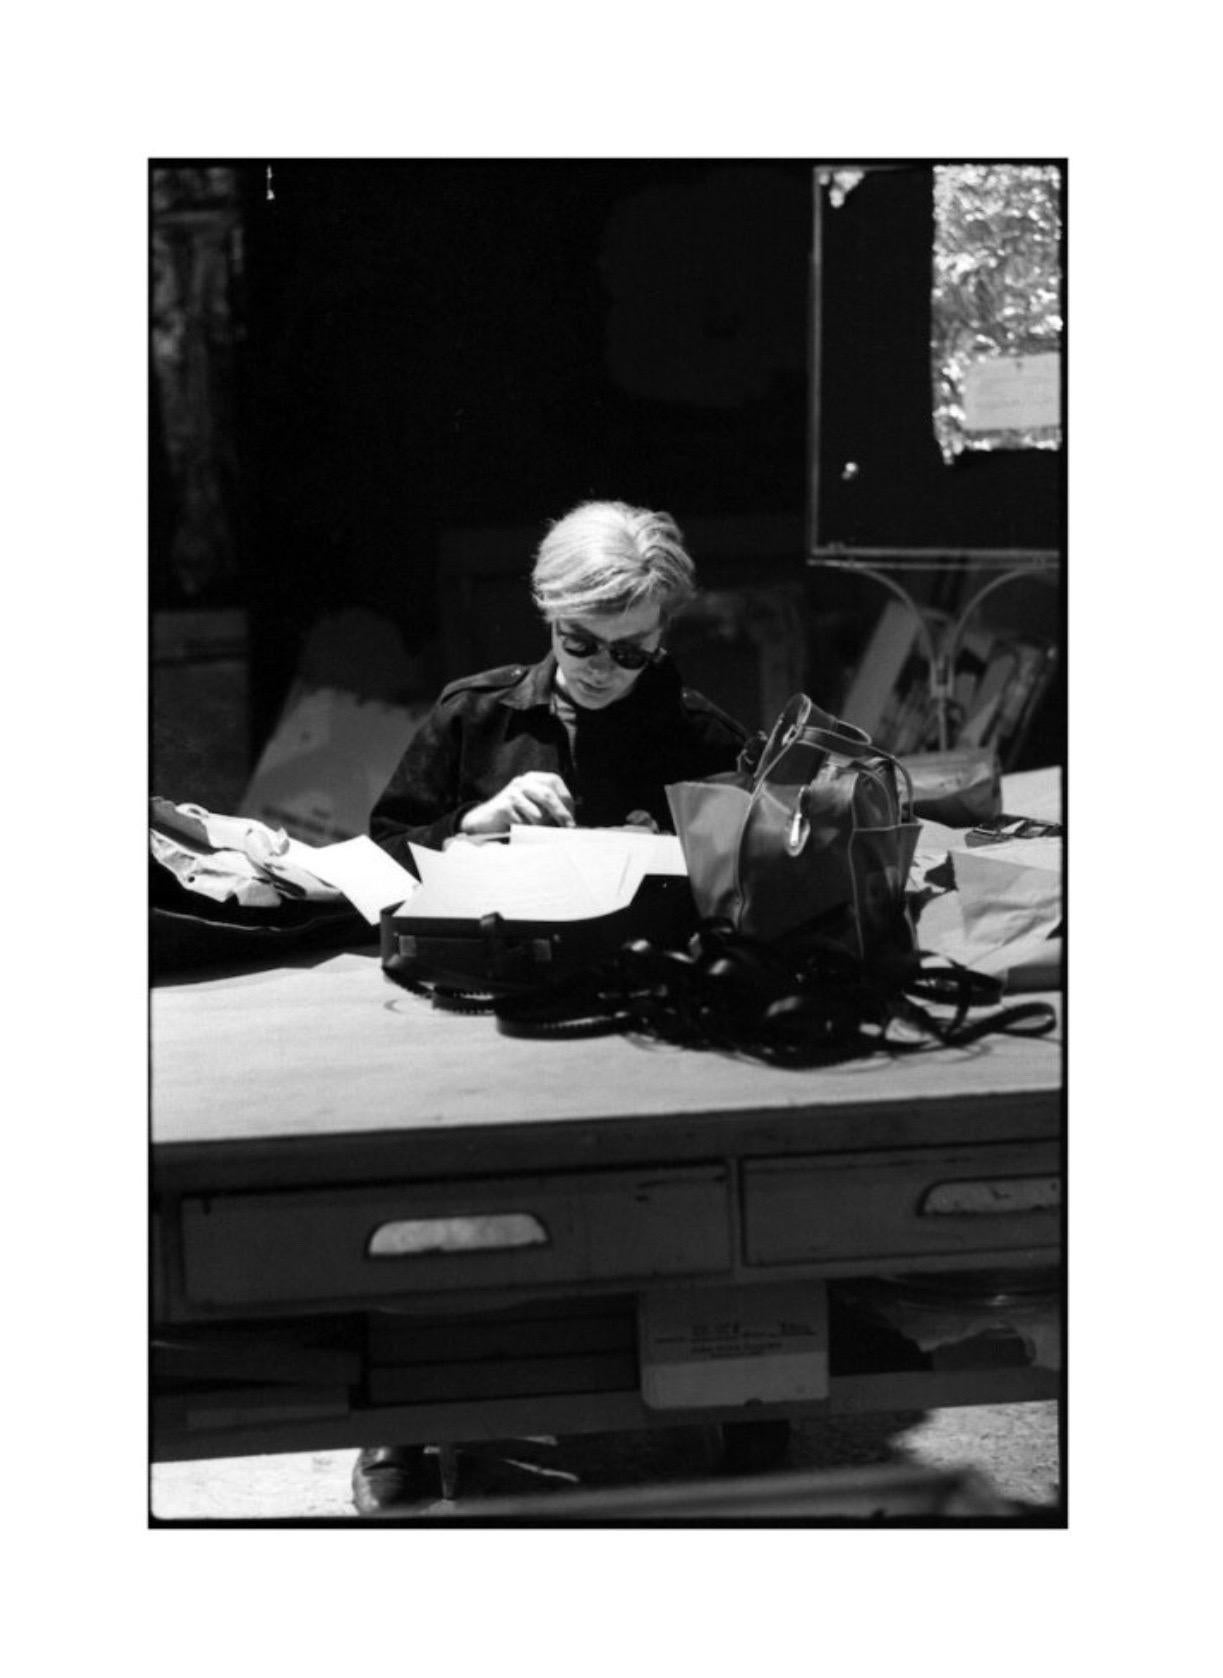 Nat Finkelstein, Andy Warhol at Typewriter NYC, 1966/2020

Intimate and contemplative portrait of Andy Warhol at The Factory, New York c.1966

Semi Gloss 250gsm conservation digital paper. This paper is especially suited to photographic image